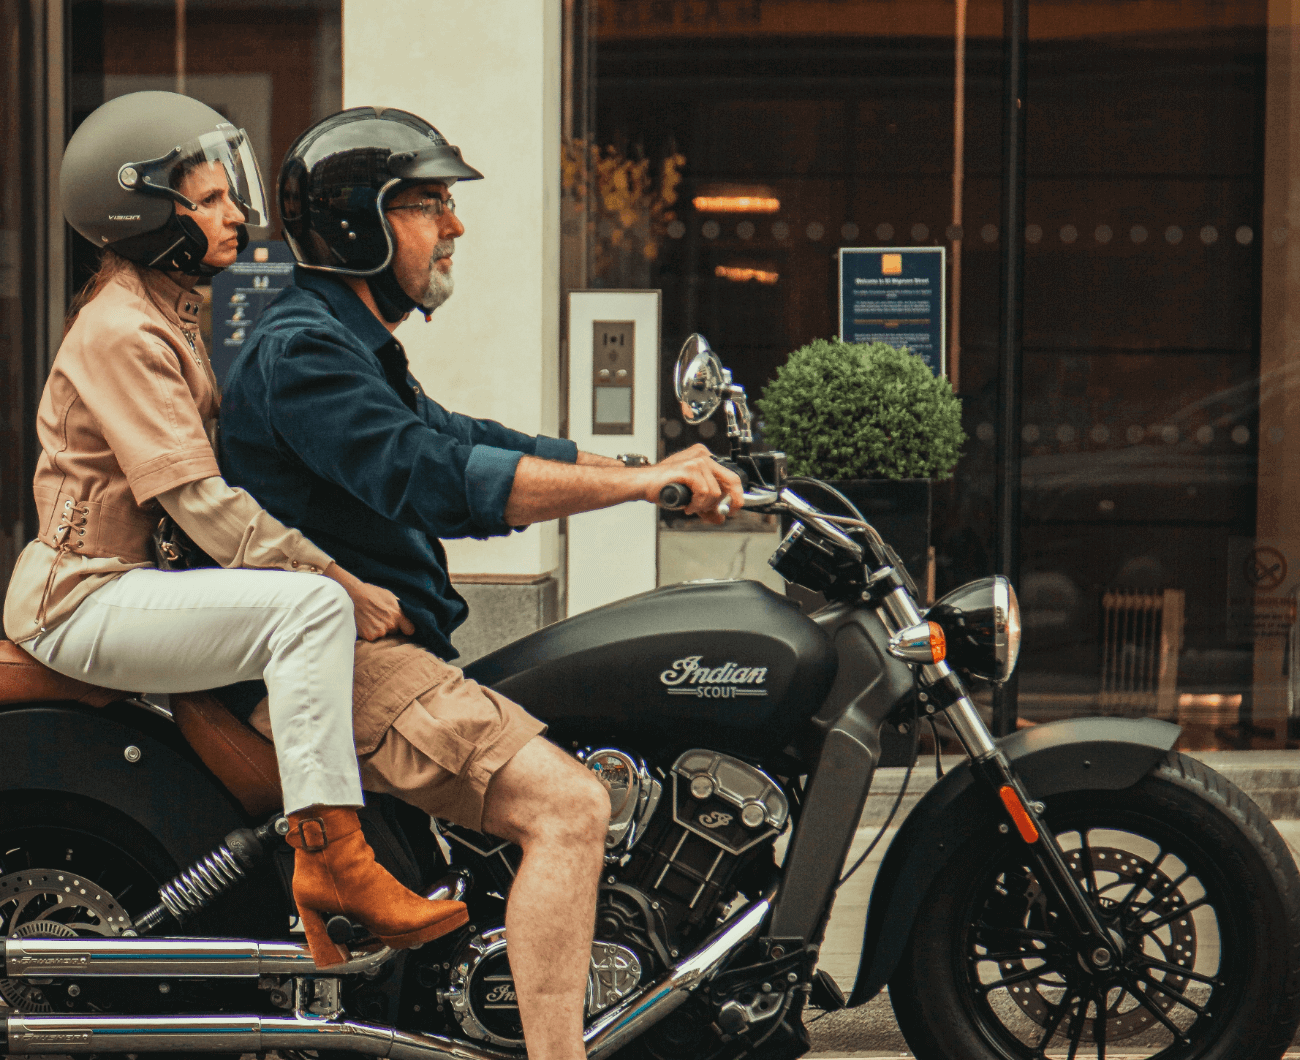 couple on the motorcycle